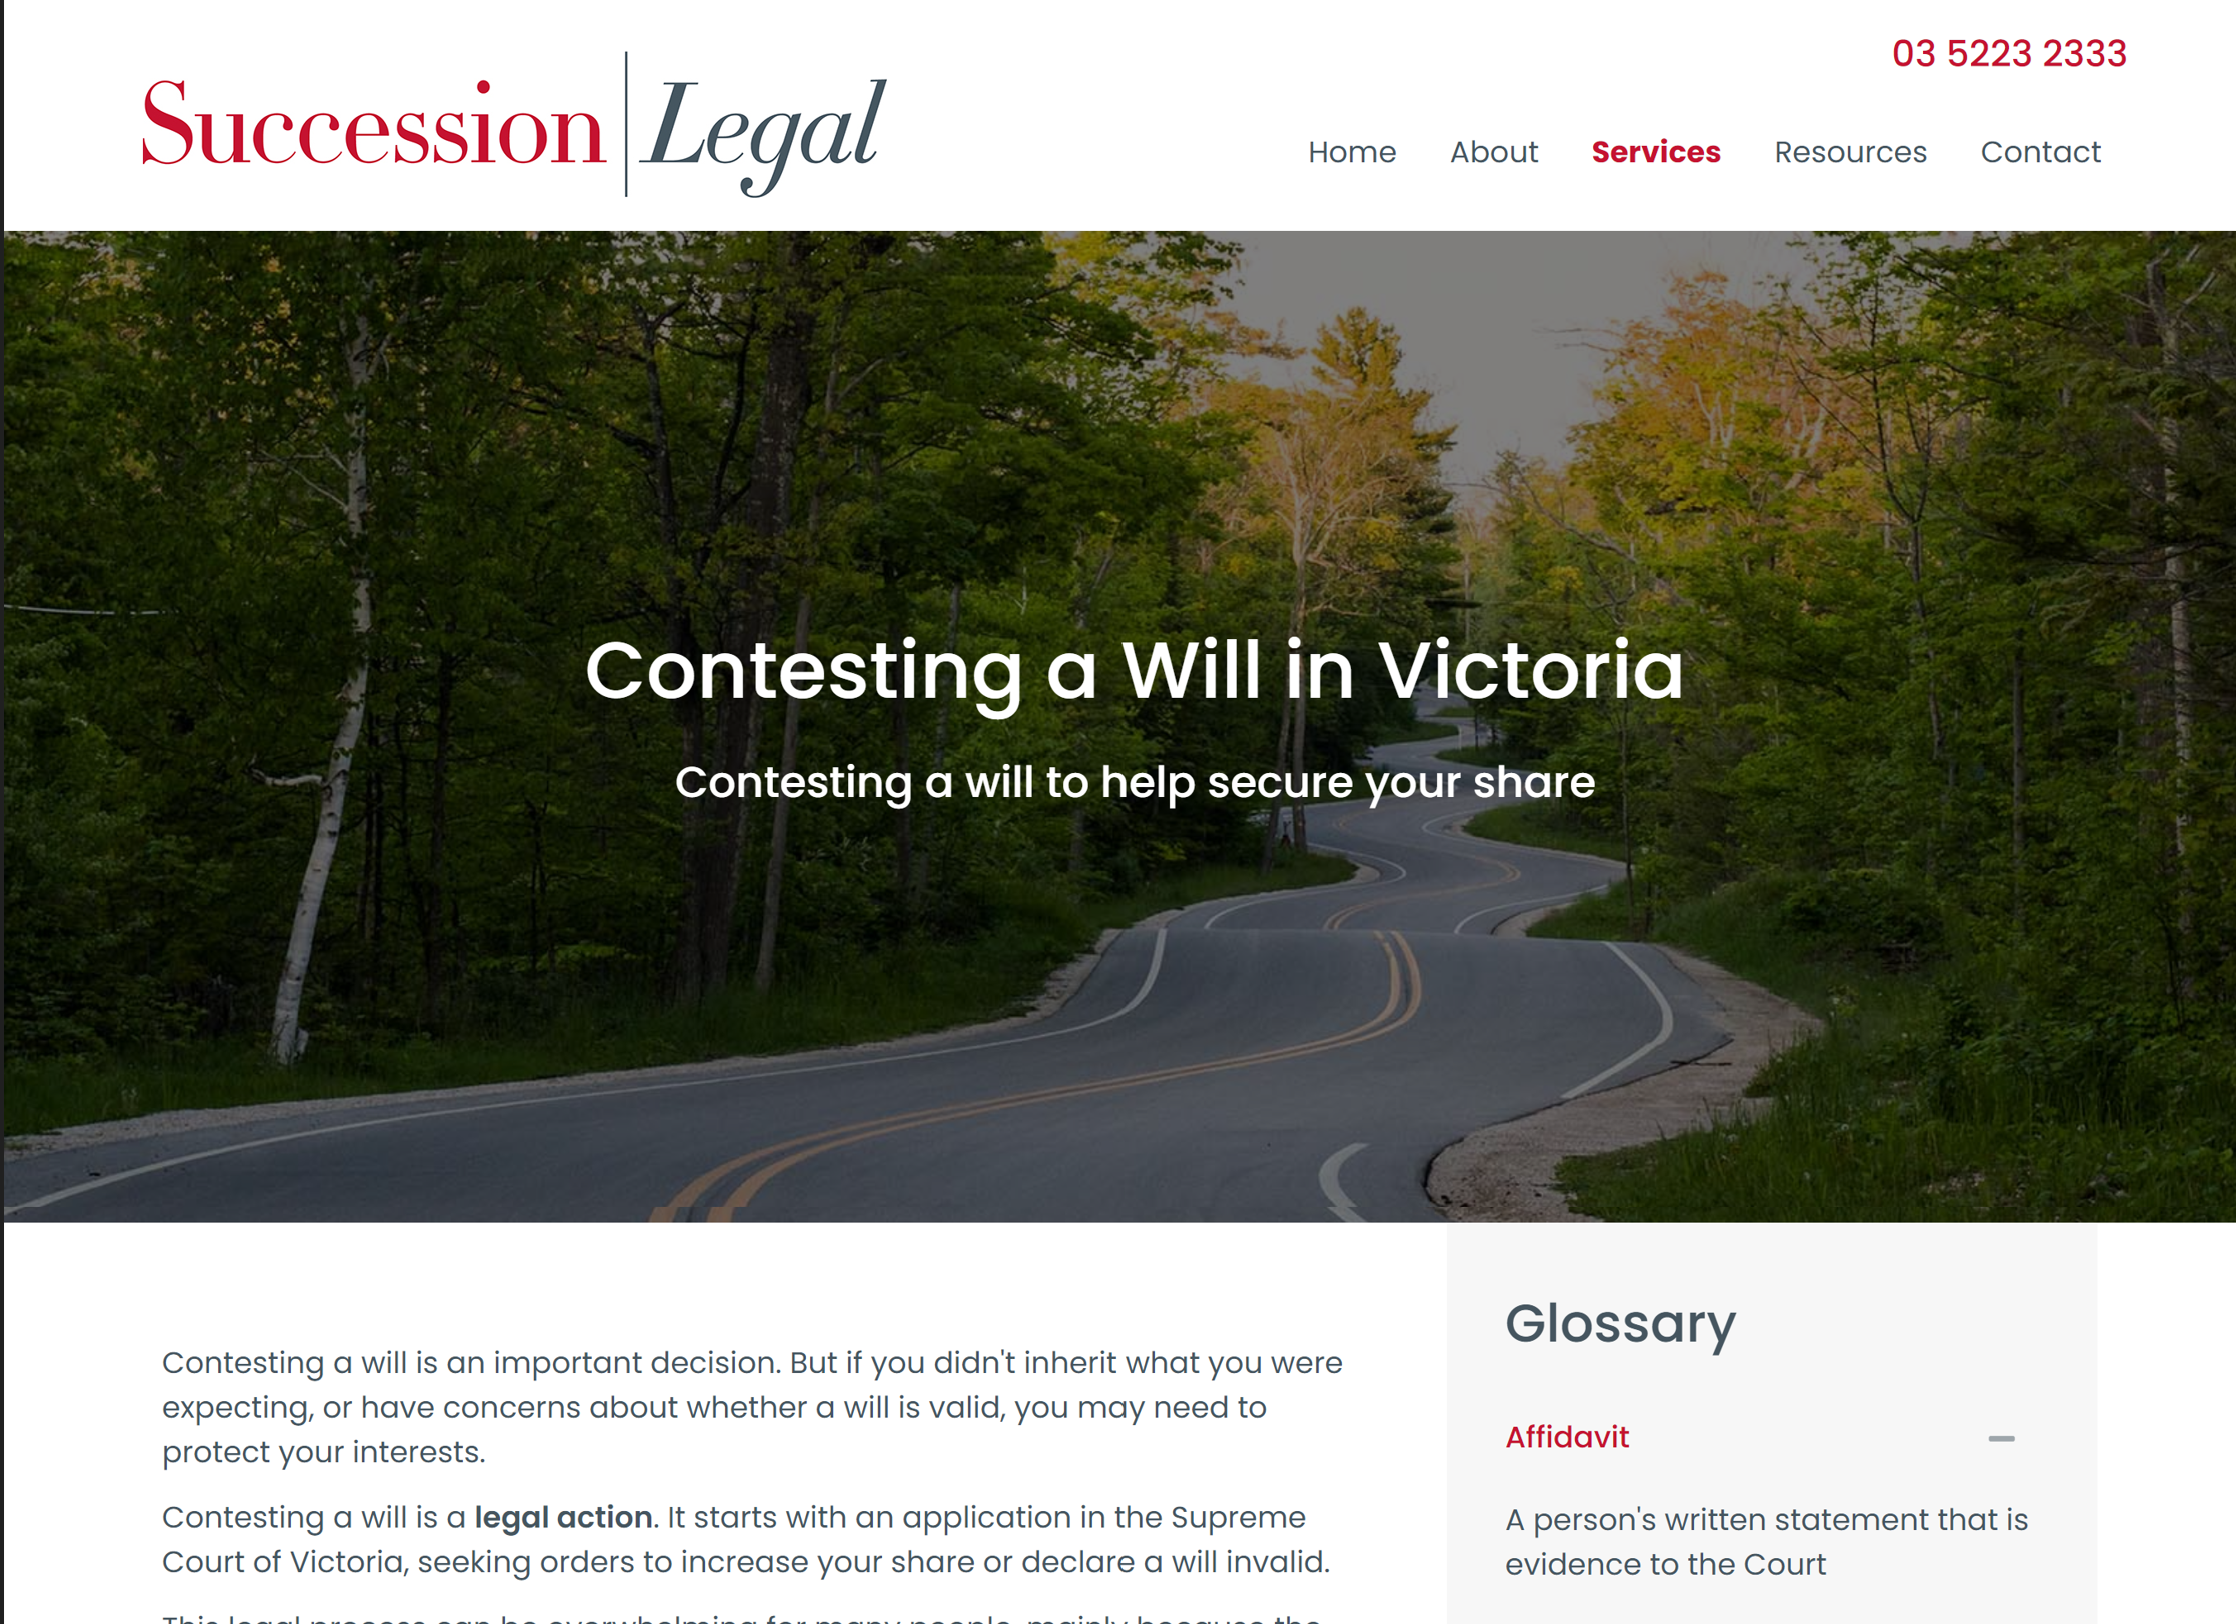 Succession Legal homepage 1